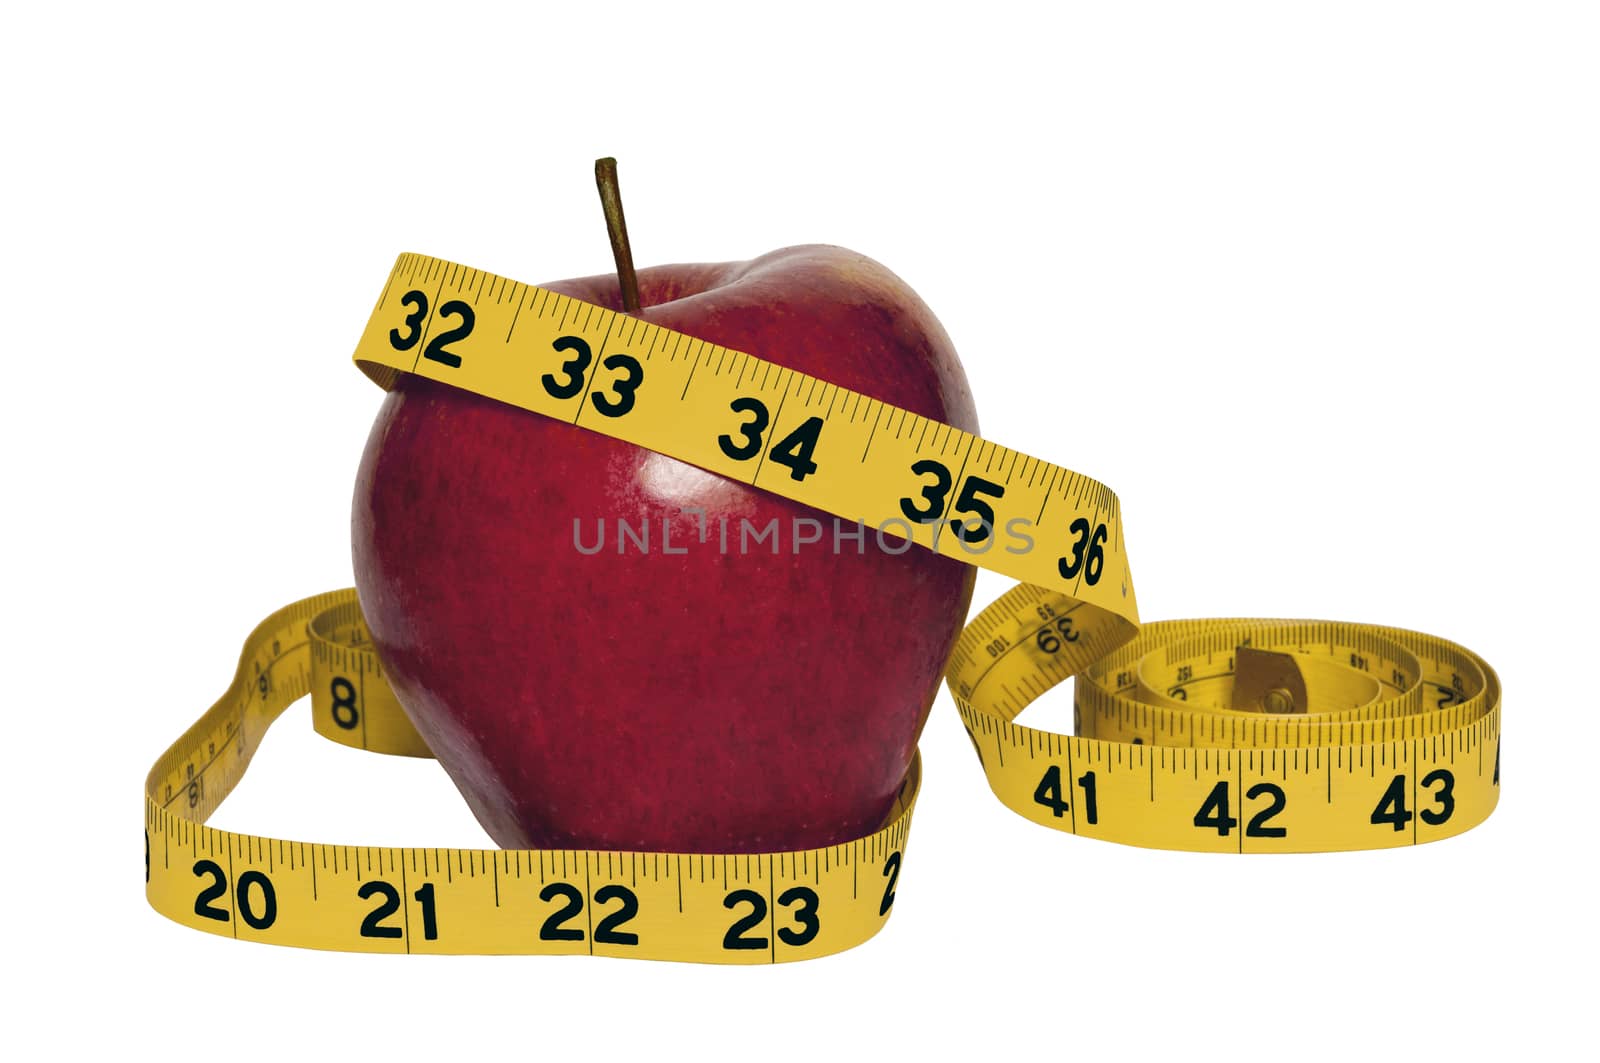 Horizontal shot of a delicious shiny red apple with a yellow tape measure. Concept of eating healthy and losing weight.  Isolated on white background